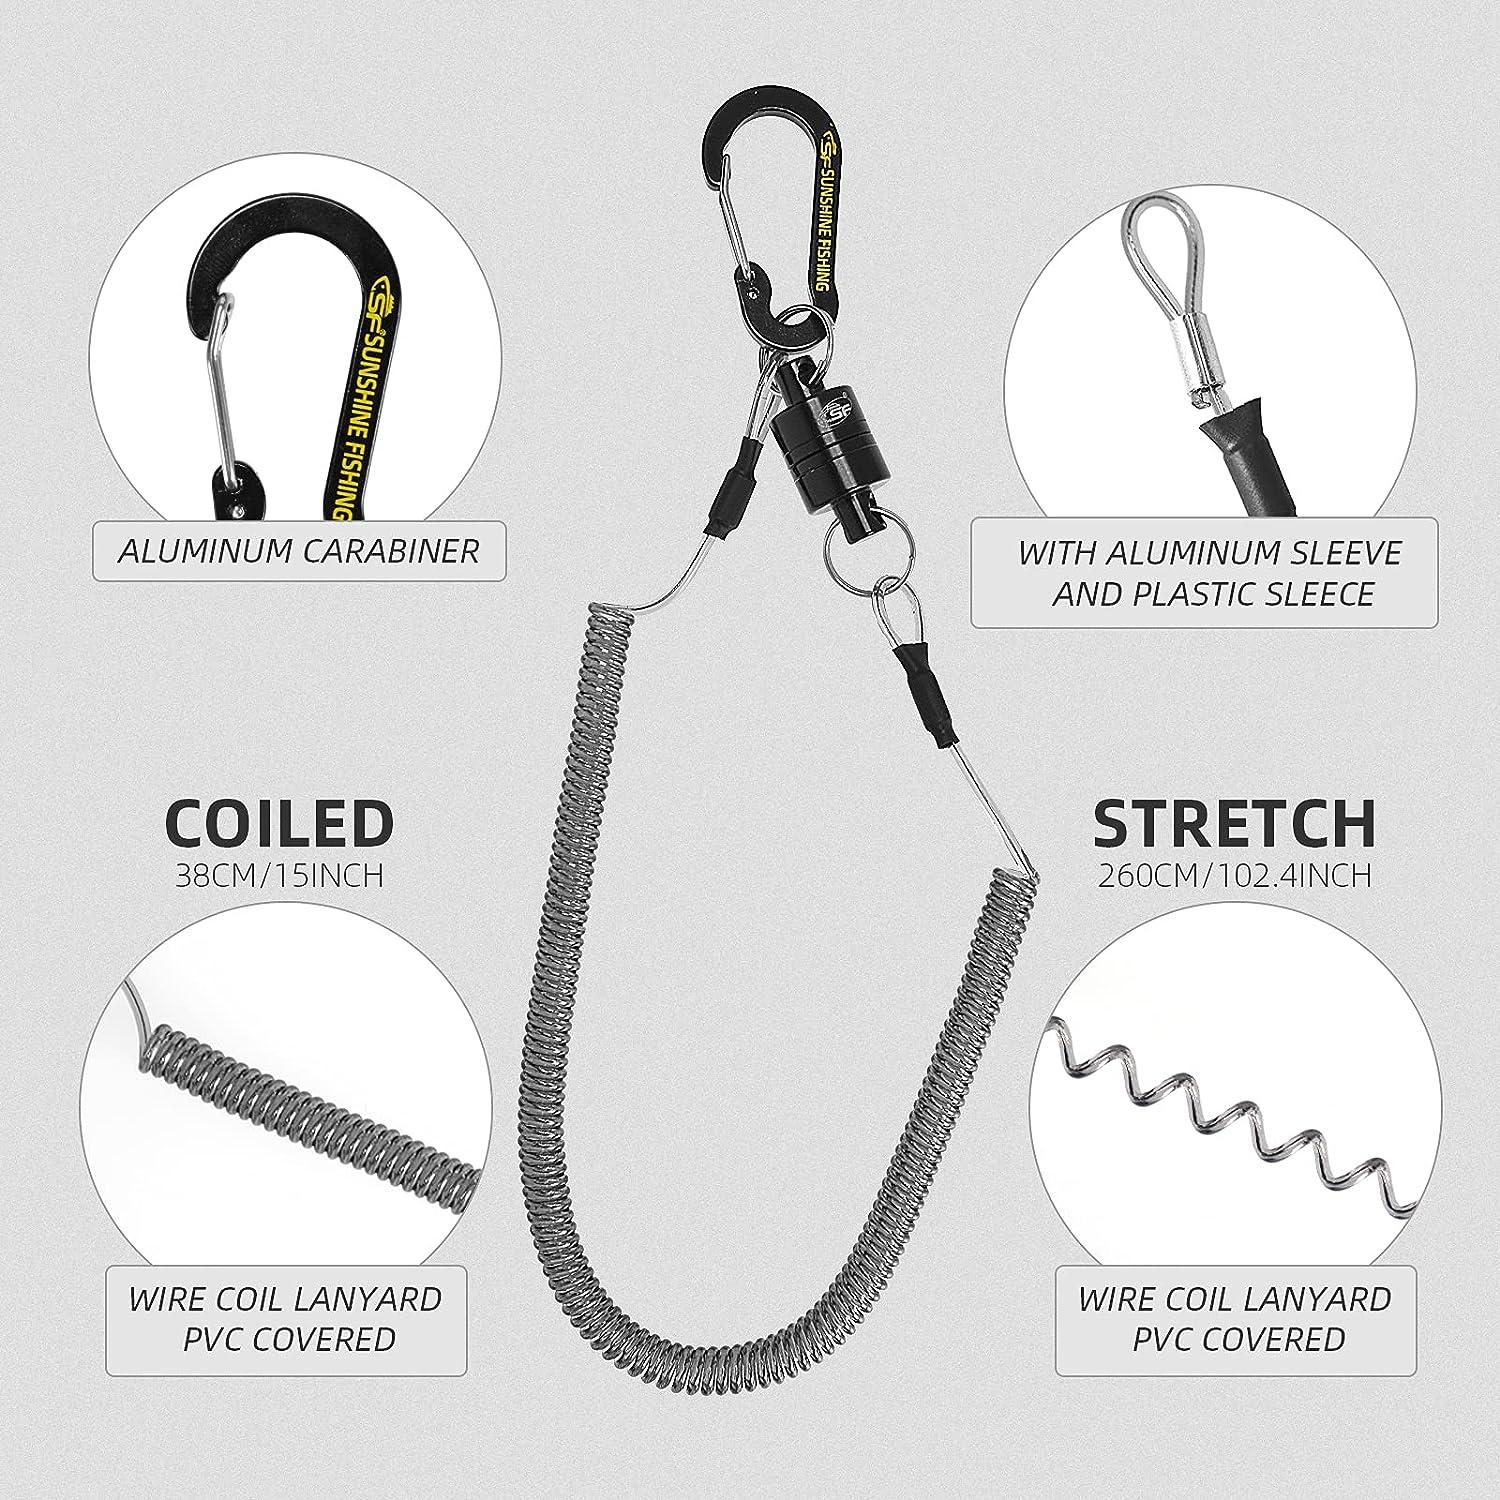 SF Strongest Magnetic Net Release Magnetic Keychain Fly Fishing Net  Retractor Magnet Clip Holder Retractor with Retractable Coiled Lanyard  Carabiner Black Magnet+ Black Carabiner Long Lanyard: For Landing Net etc.